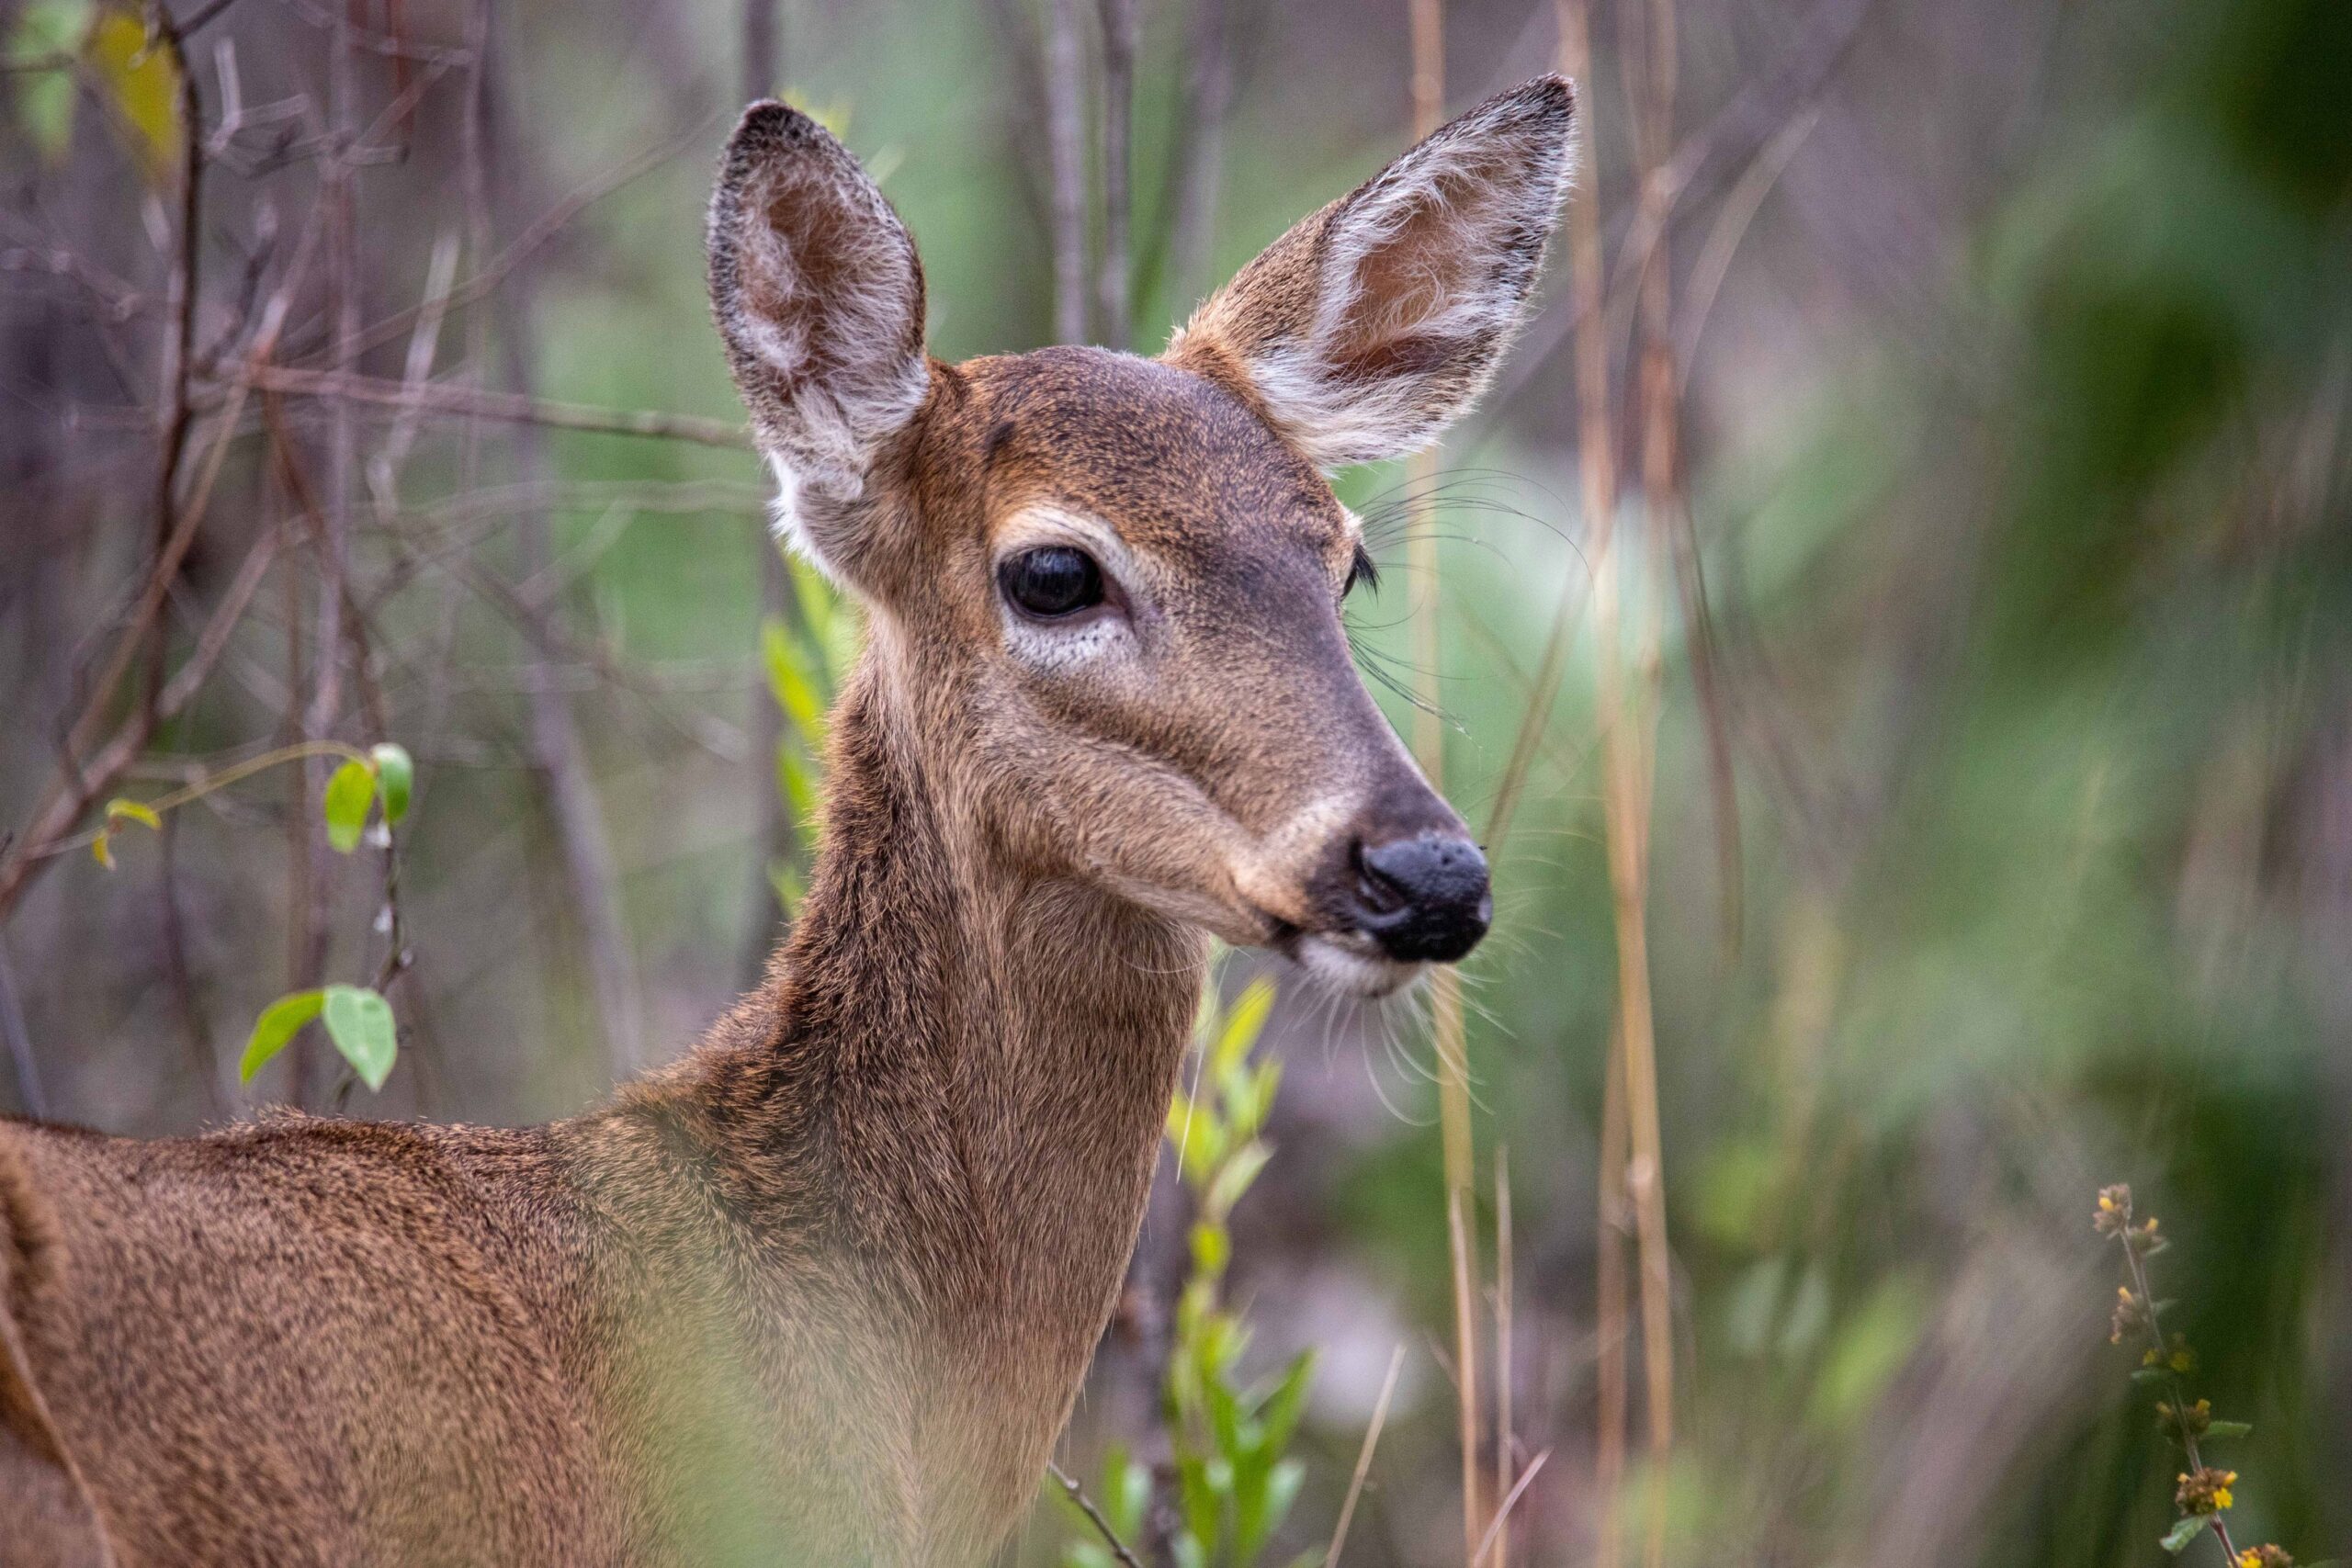 How to build an inexpensive but effective deer fence - SeedSavers